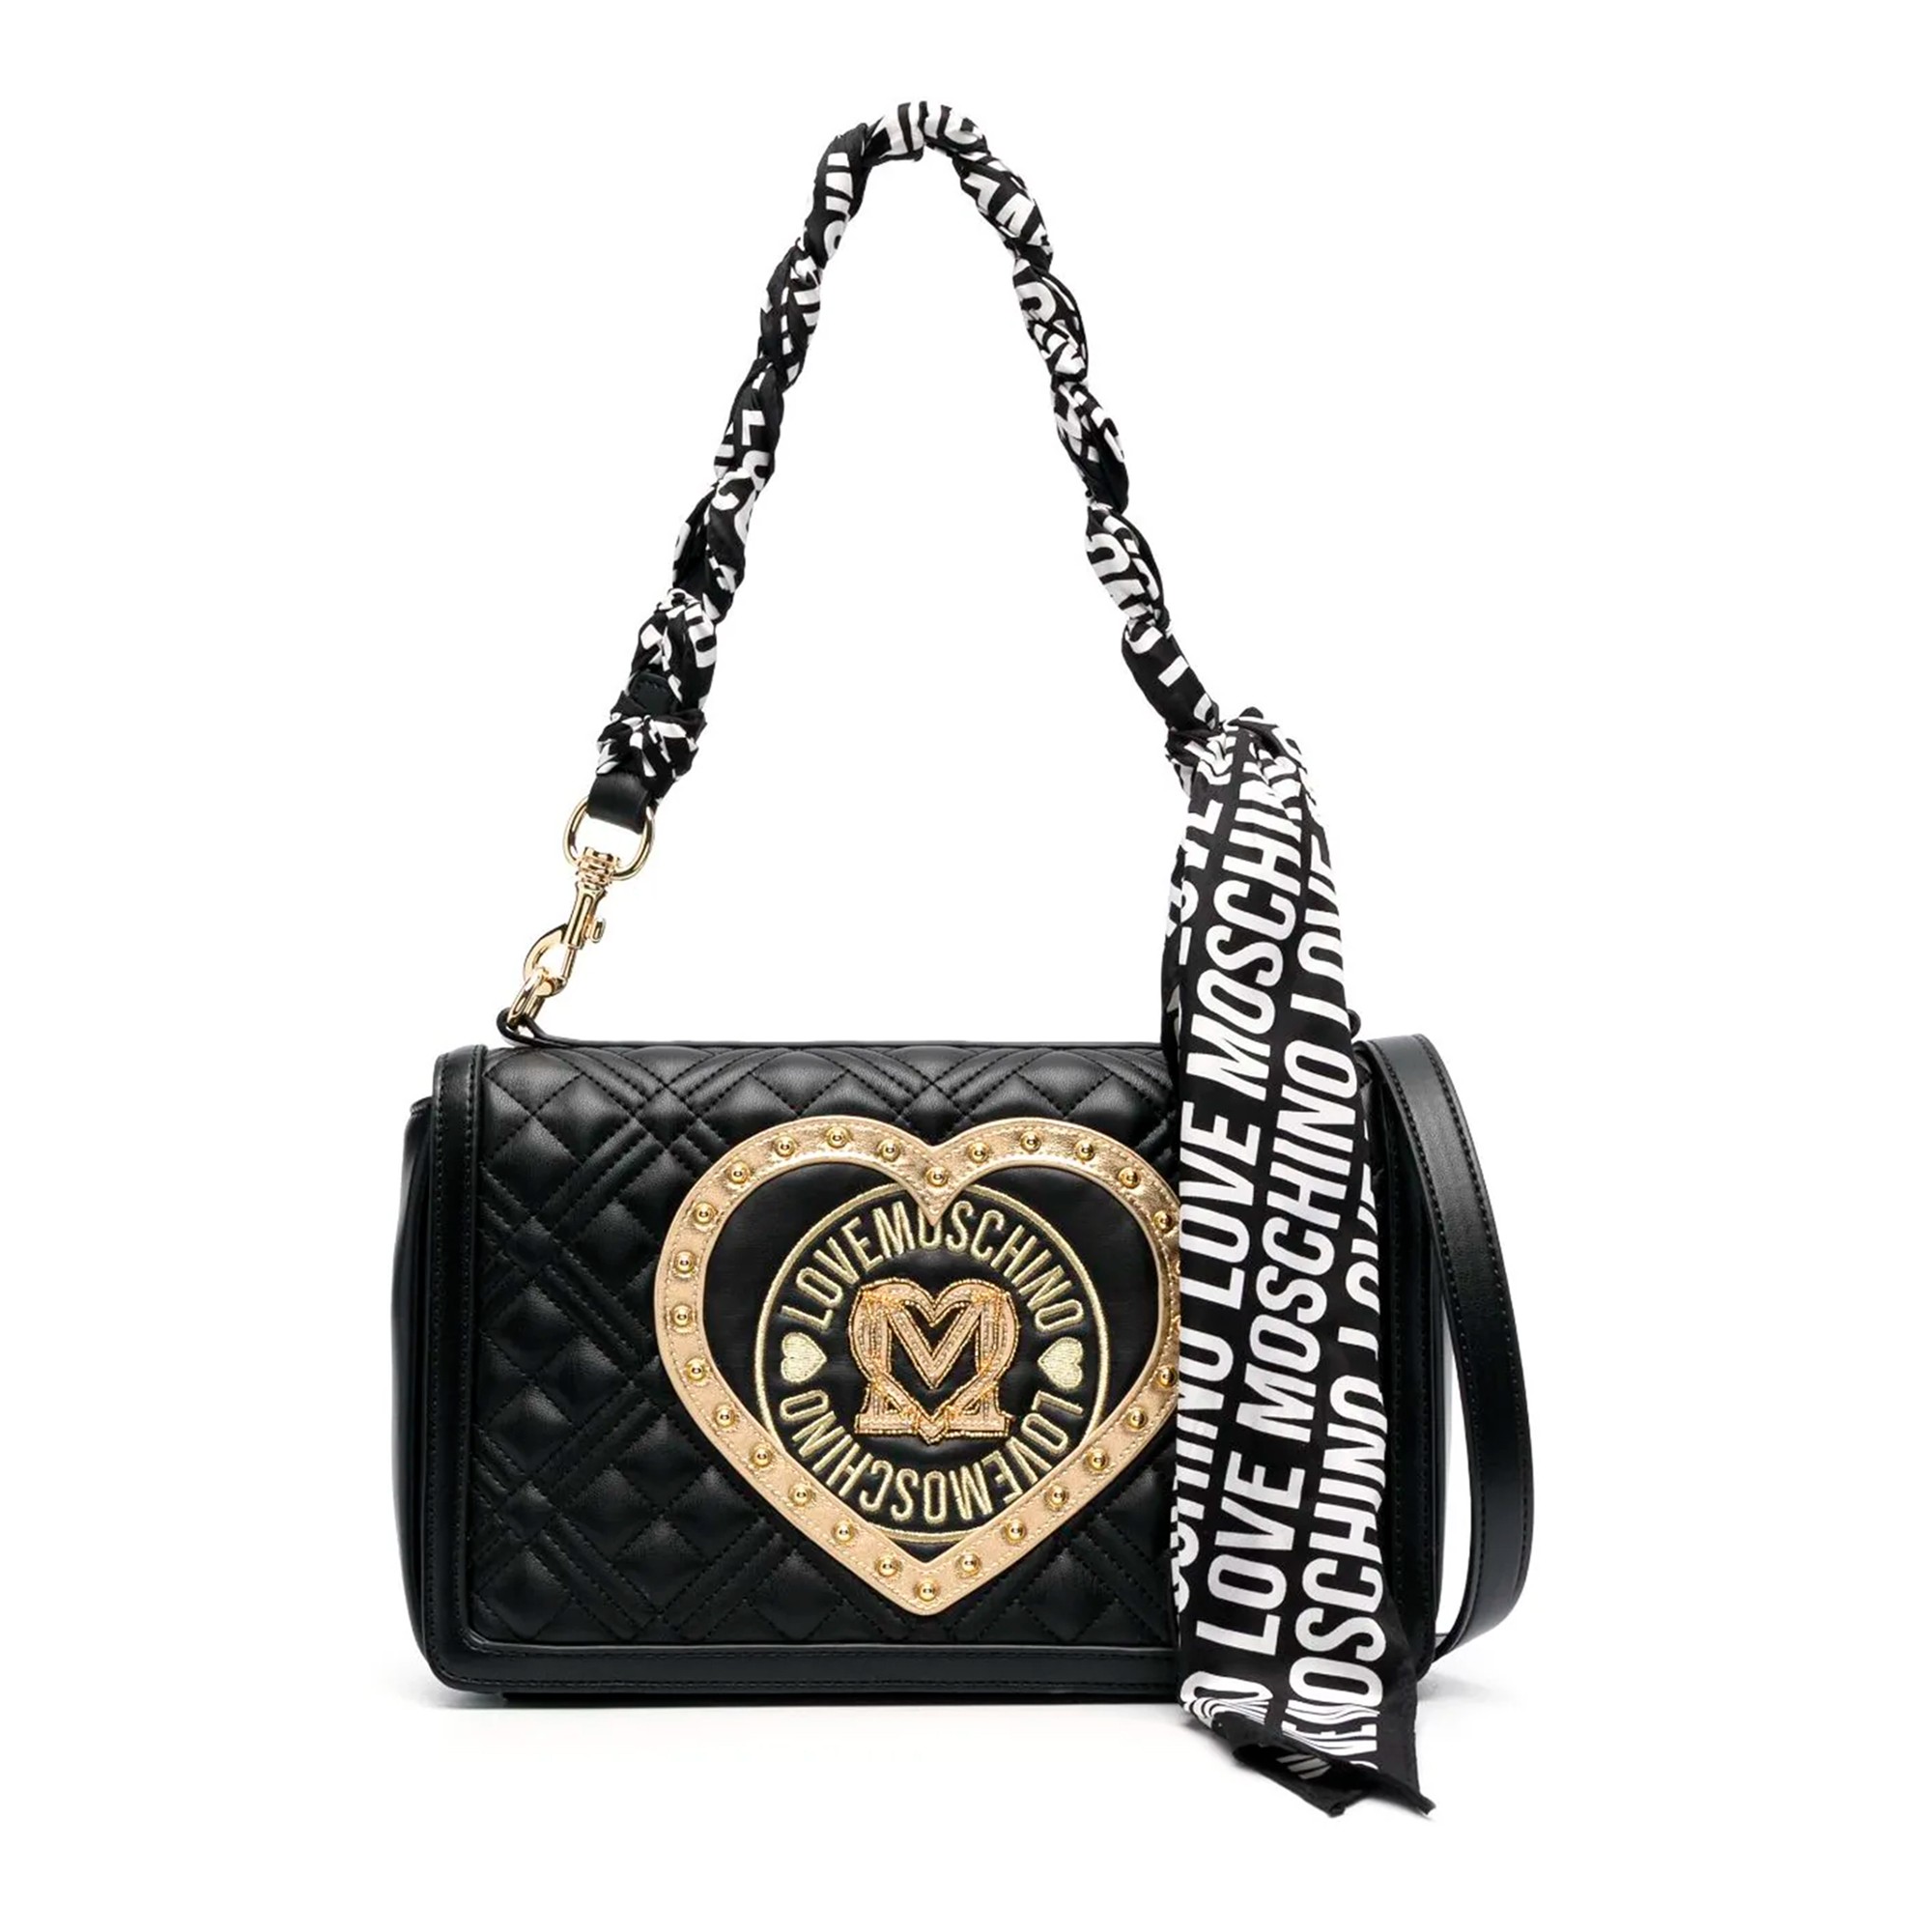 Love Moschino | Bags | New Love Moschino Embellished Faux Leather Shoulder Bag  Sale | Poshmark